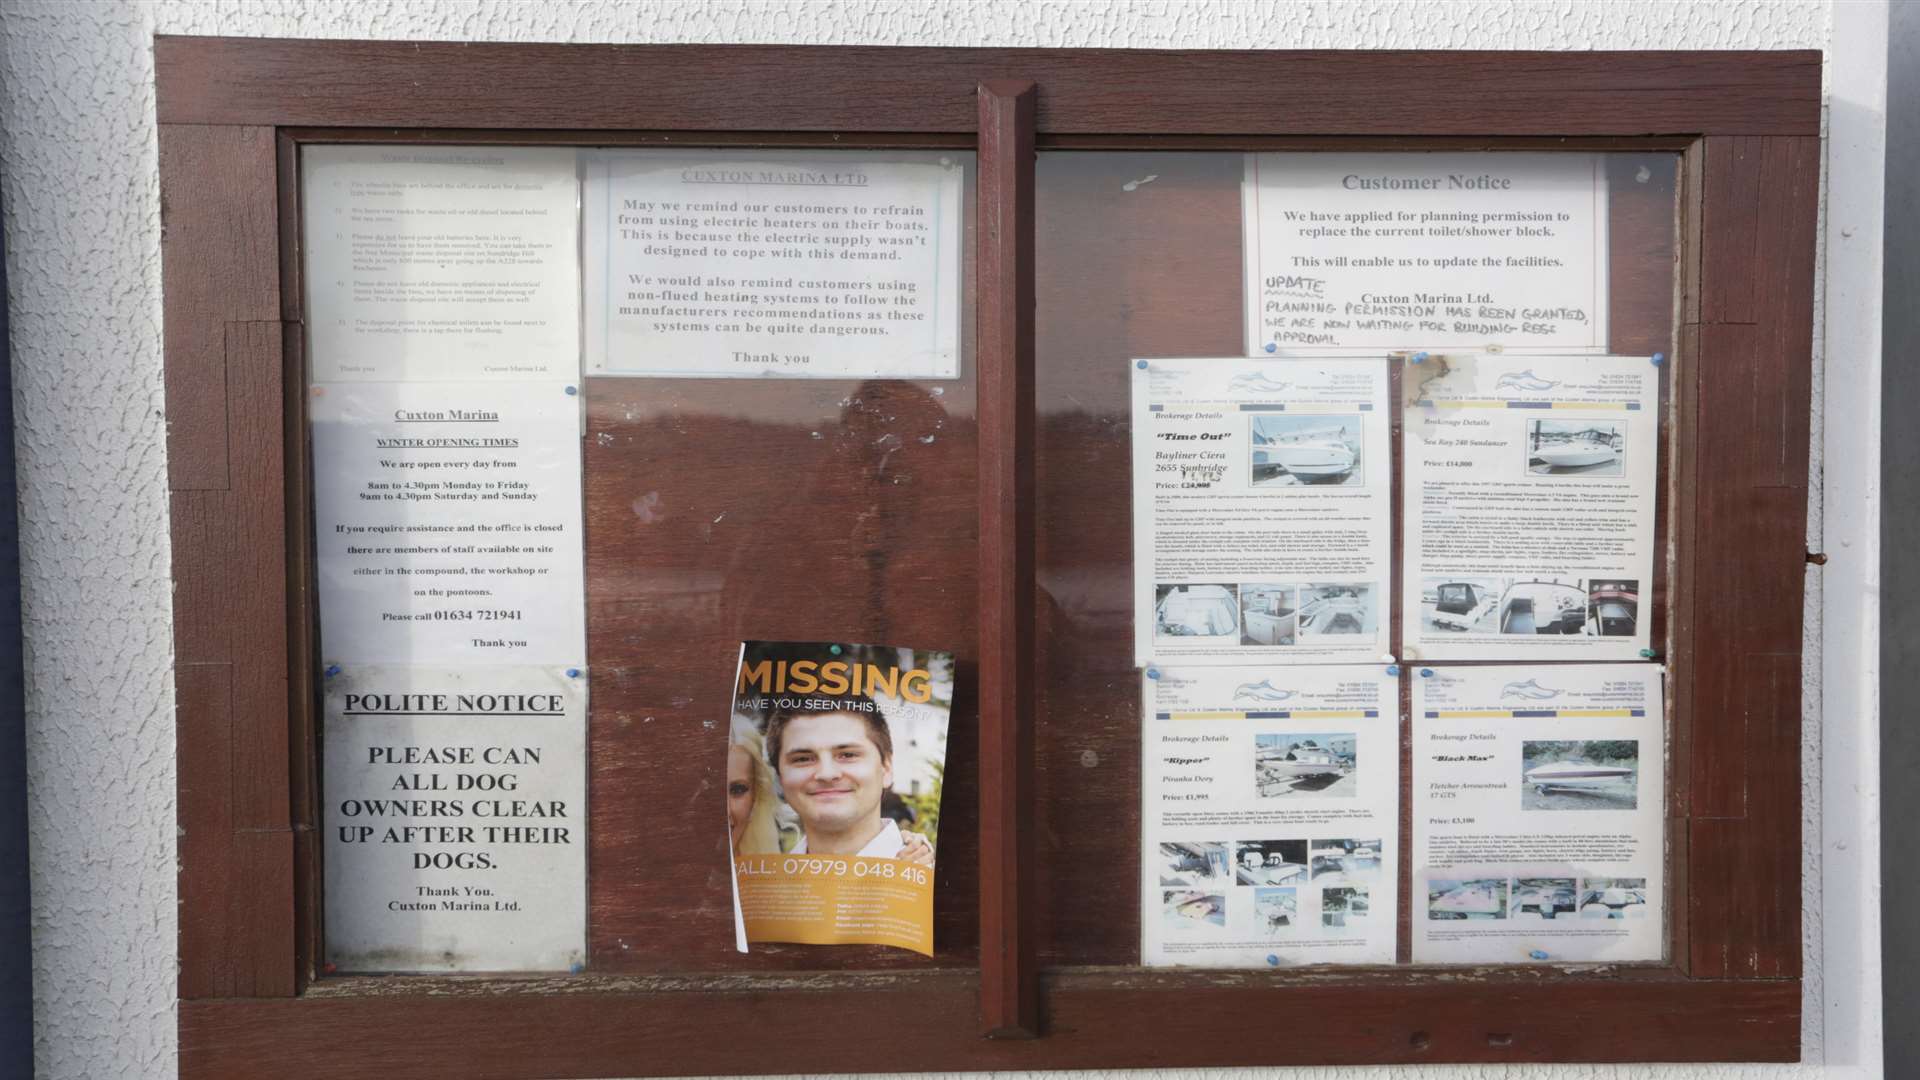 The noticeboard at Cuxton Marina displayed a poster appealing for information after Pat Lamb's disappearance.